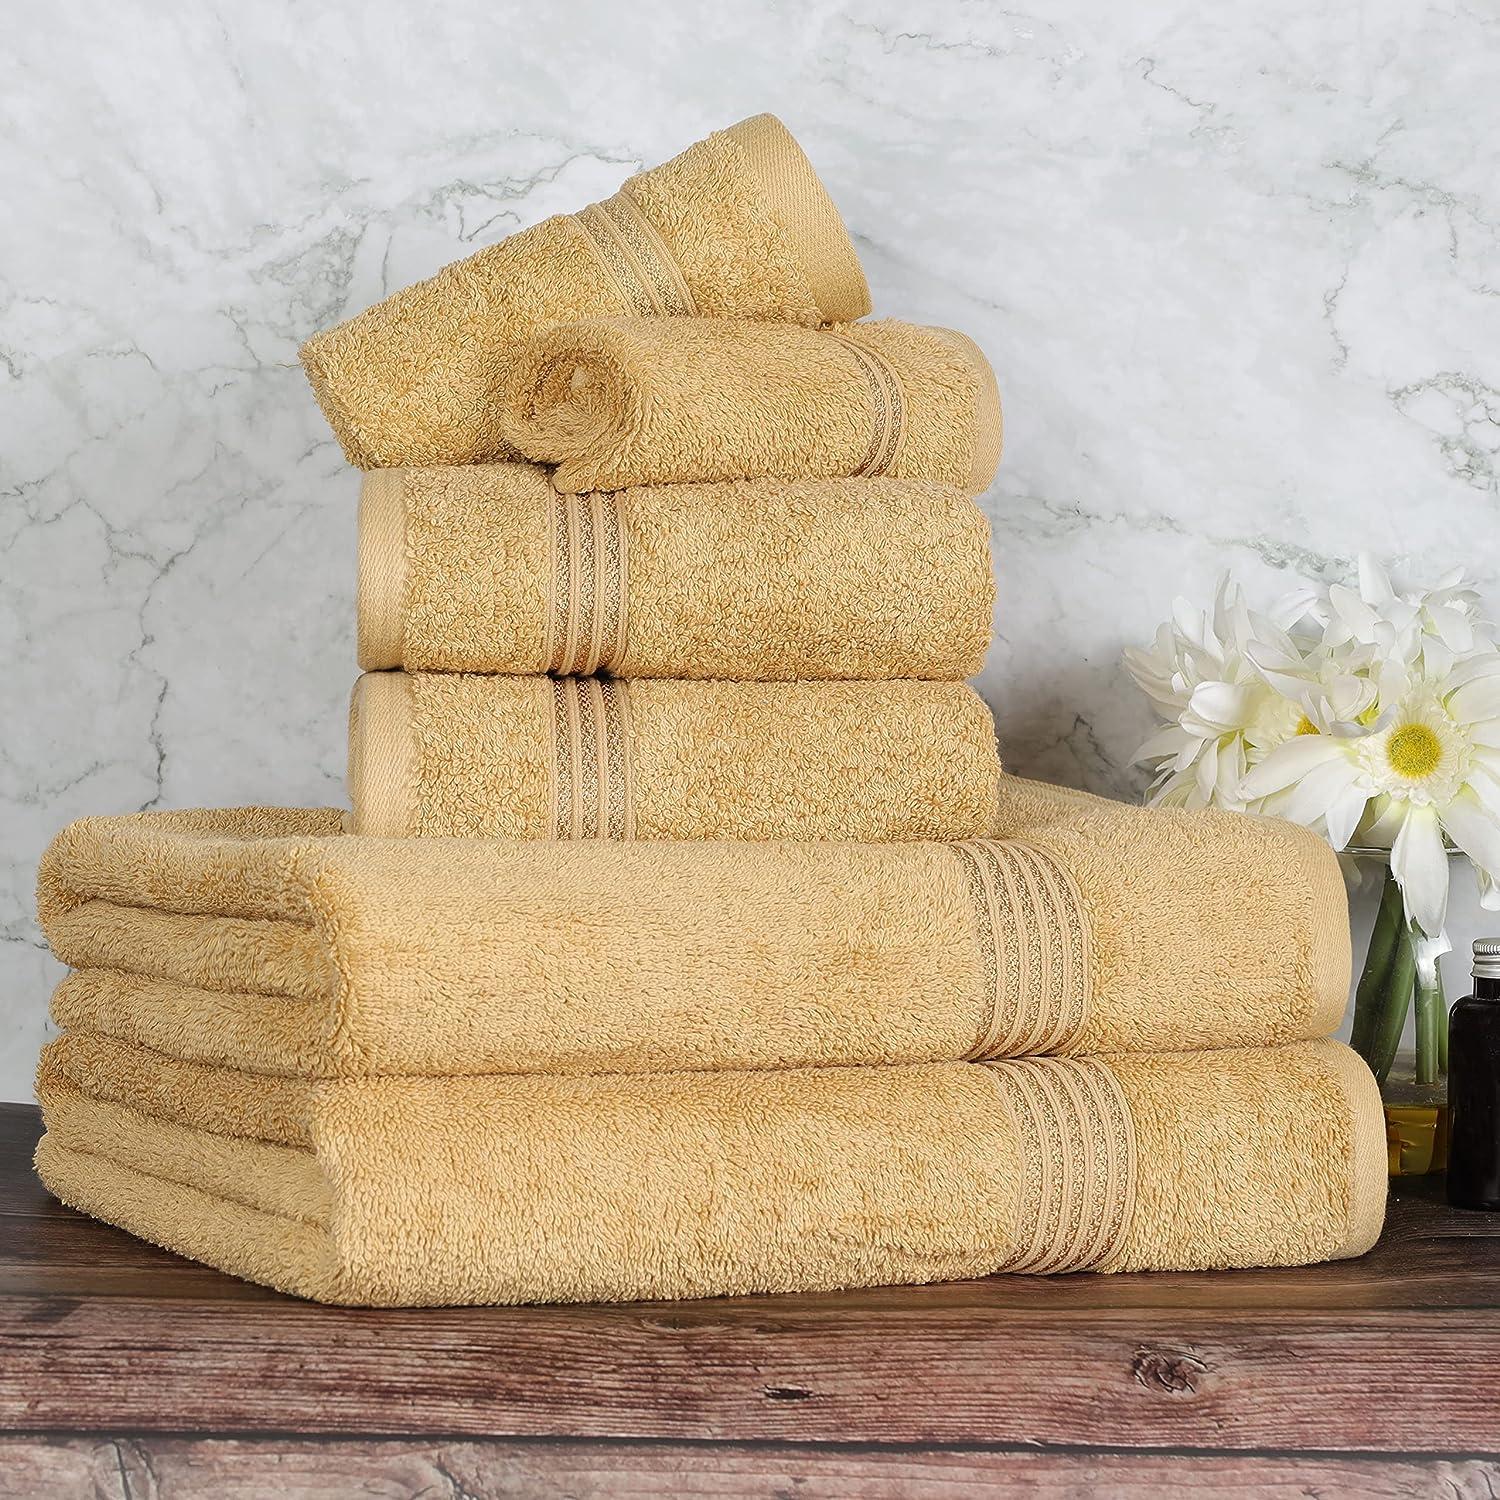 SUPERIOR Egyptian Cotton 800 GSM Towel Set, Includes 2 Bath Towels, 2 Hand  Towels, 2 Face Towels, Luxury Plush Bathroom Essentials, Ultra Thick, Spa